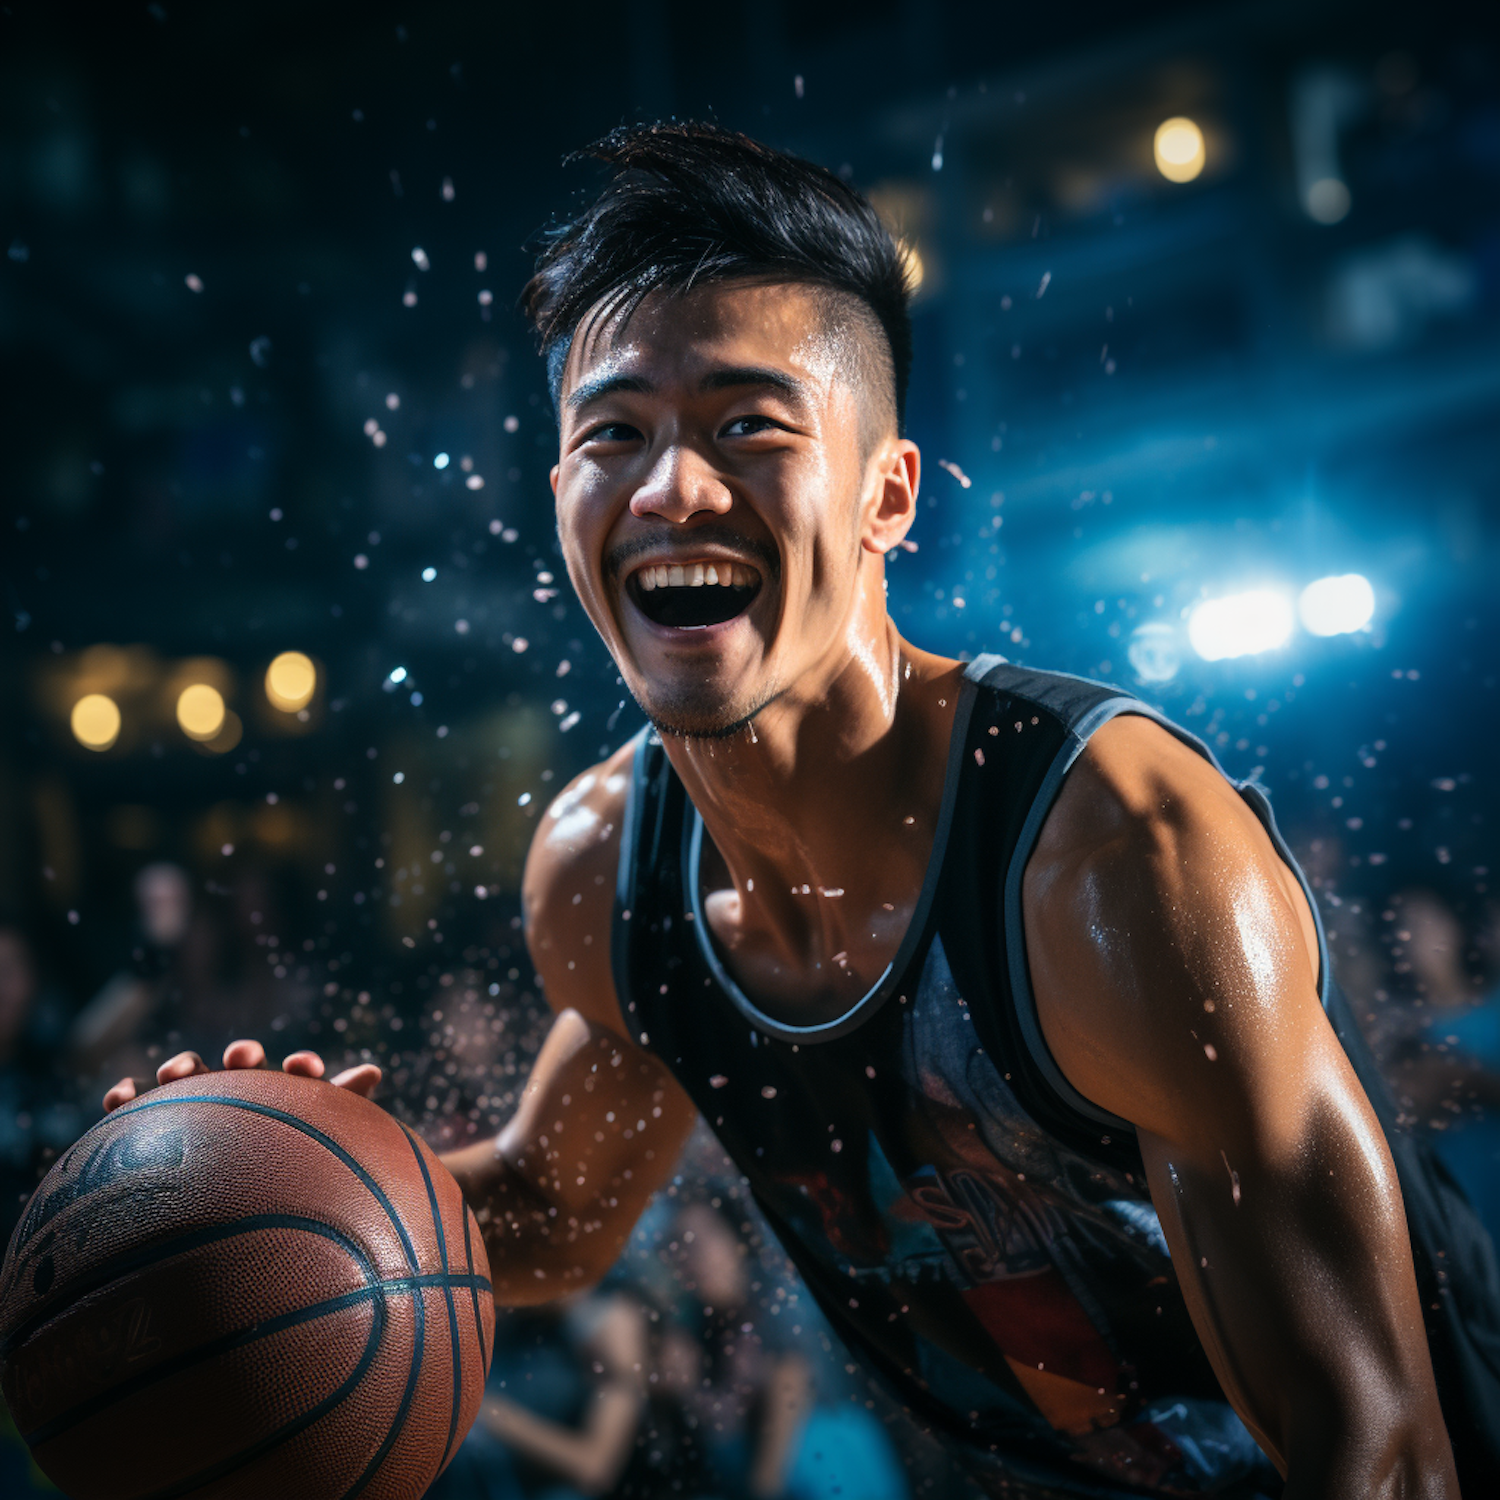 Energetic Asian Basketball Player in Action